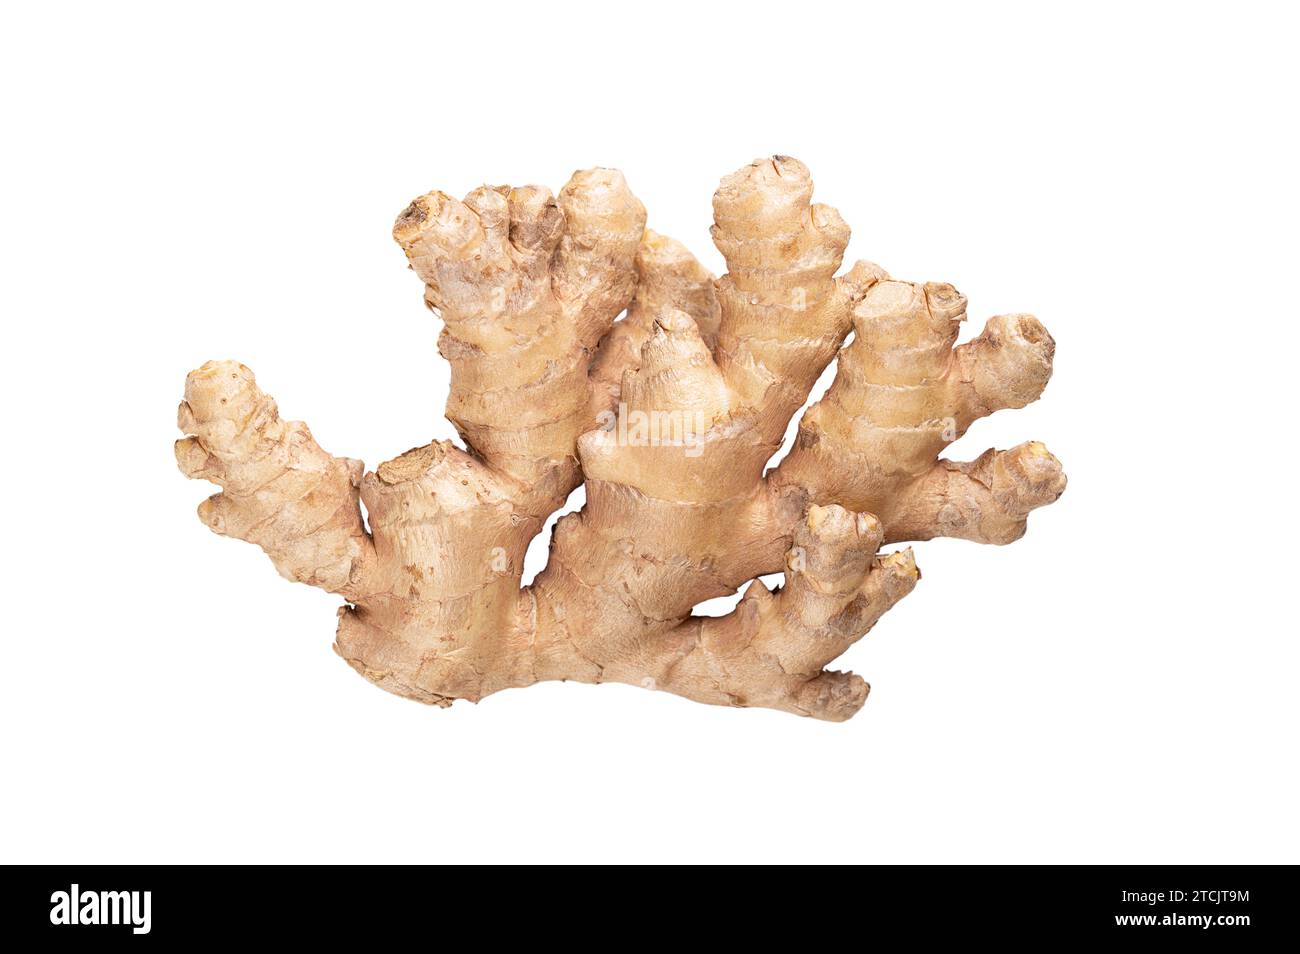 Fresh ginger root, from above. Juicy and fleshy rhizome of Zingiber officinale, used as fragrant kitchen spice and in traditional folk medicine. Stock Photo